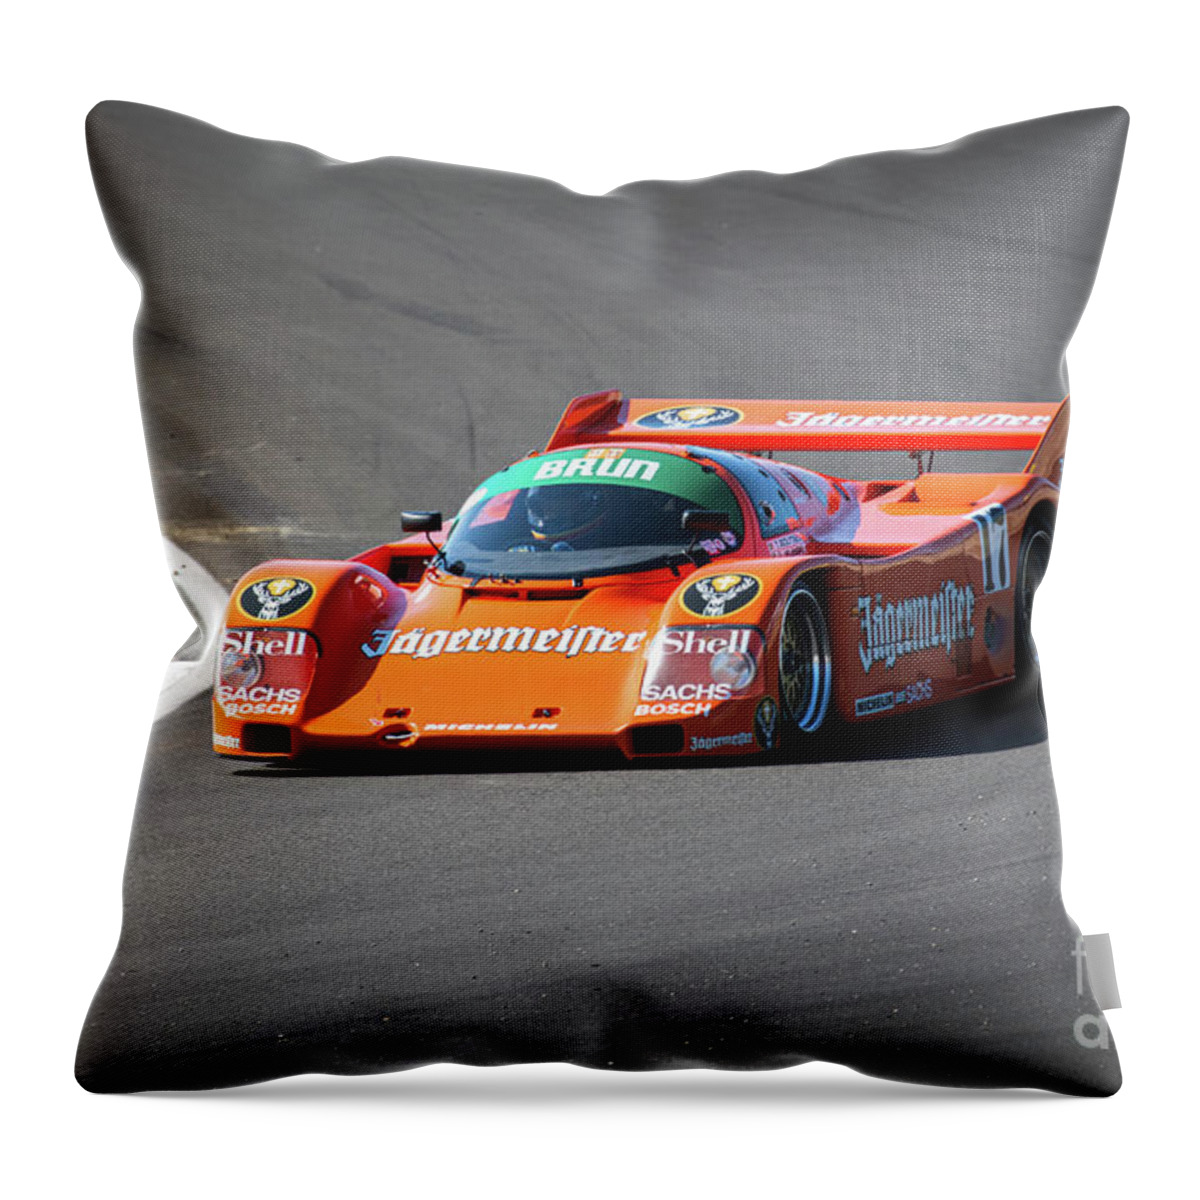  Throw Pillow featuring the photograph Jager Bomb by Vincent Bonafede